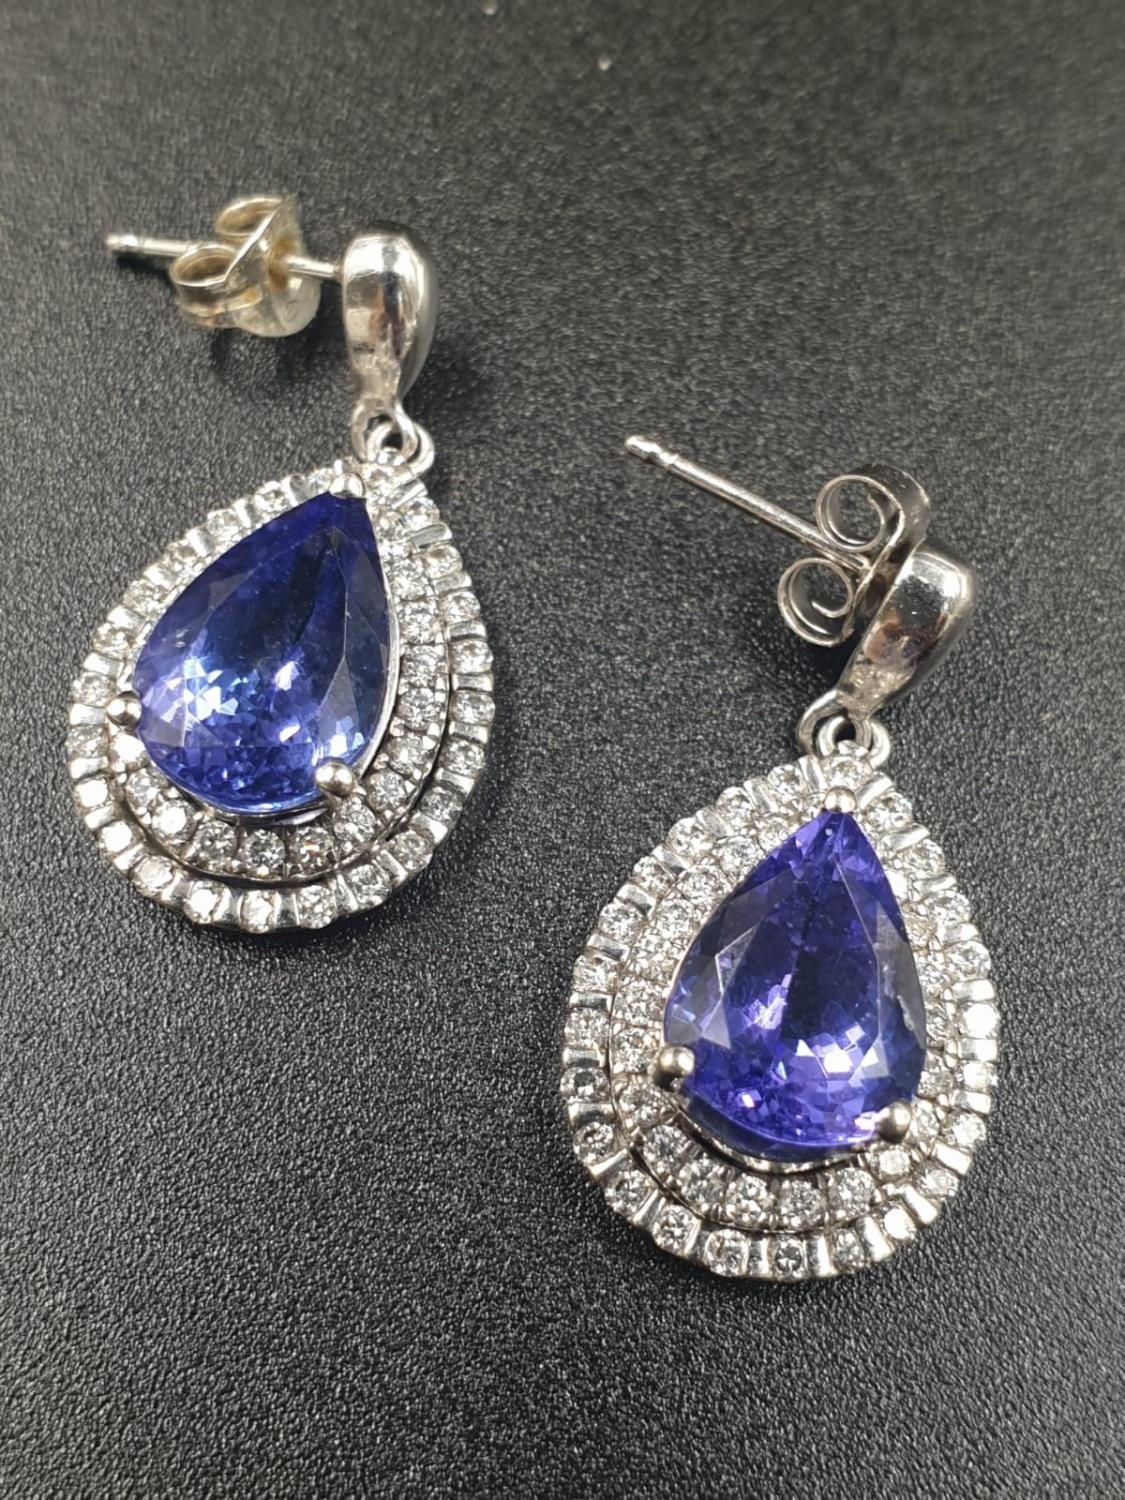 A 14CT WHITE GOLD MATCHING SET OF EARRINGS AND DRESS RING WITH LARGE PEAR SHAPED TANZANITE STONES - Image 9 of 14